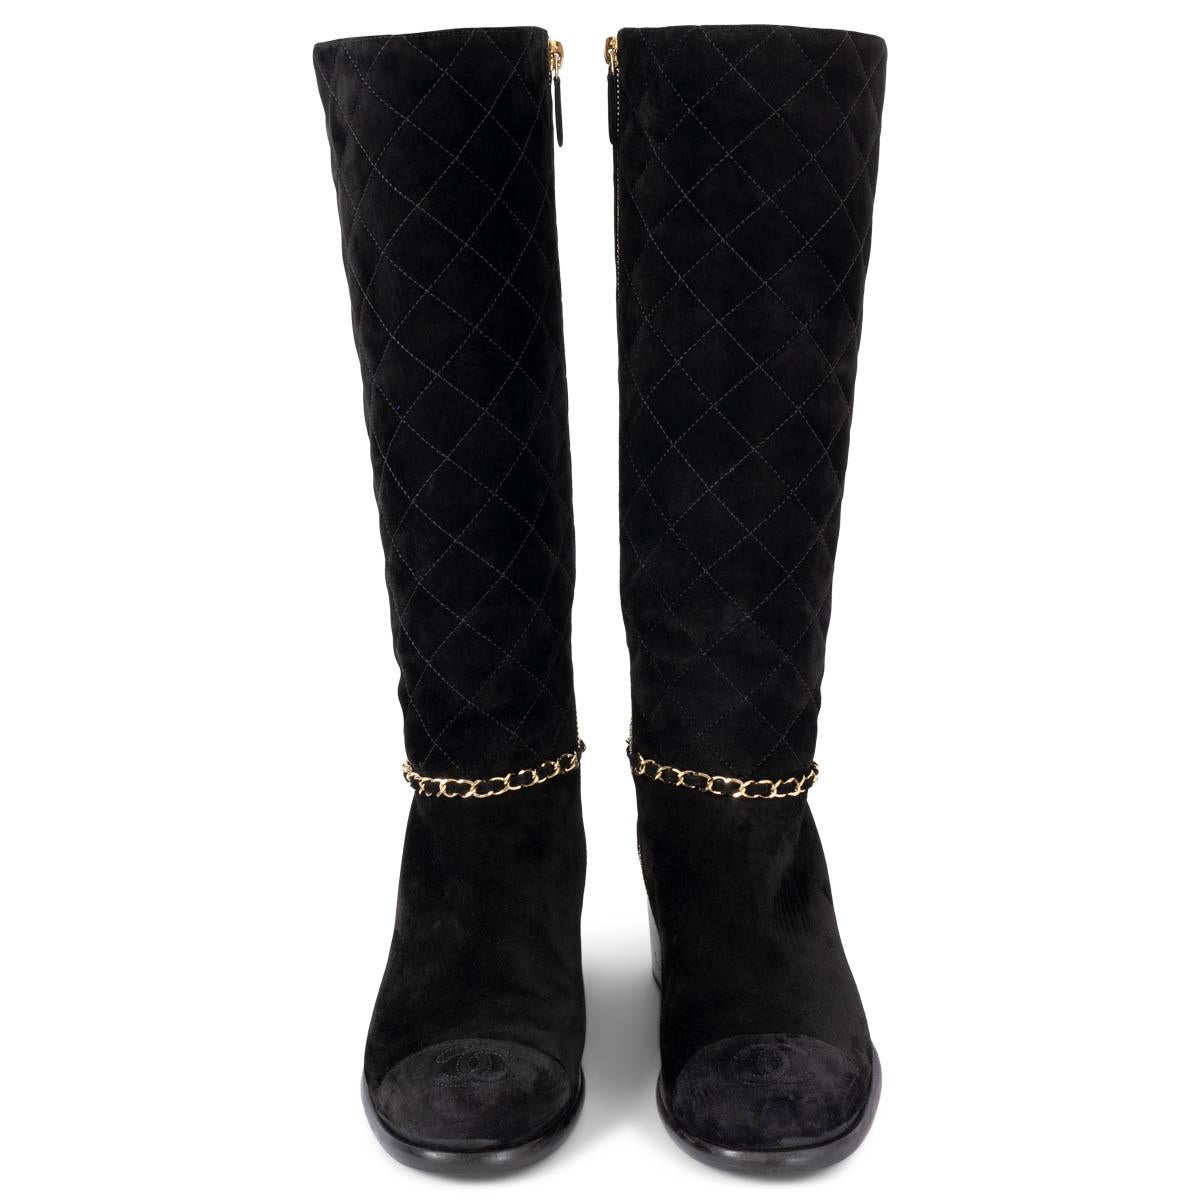 100% authentic Chanel knee-high block-heel boots in black quilted suede featuring signature gold-tone chain detail around the ankle. Open with a zipper on the inside and are lined in smooth black leather. CC logo stitching on cap toe. Have been worn